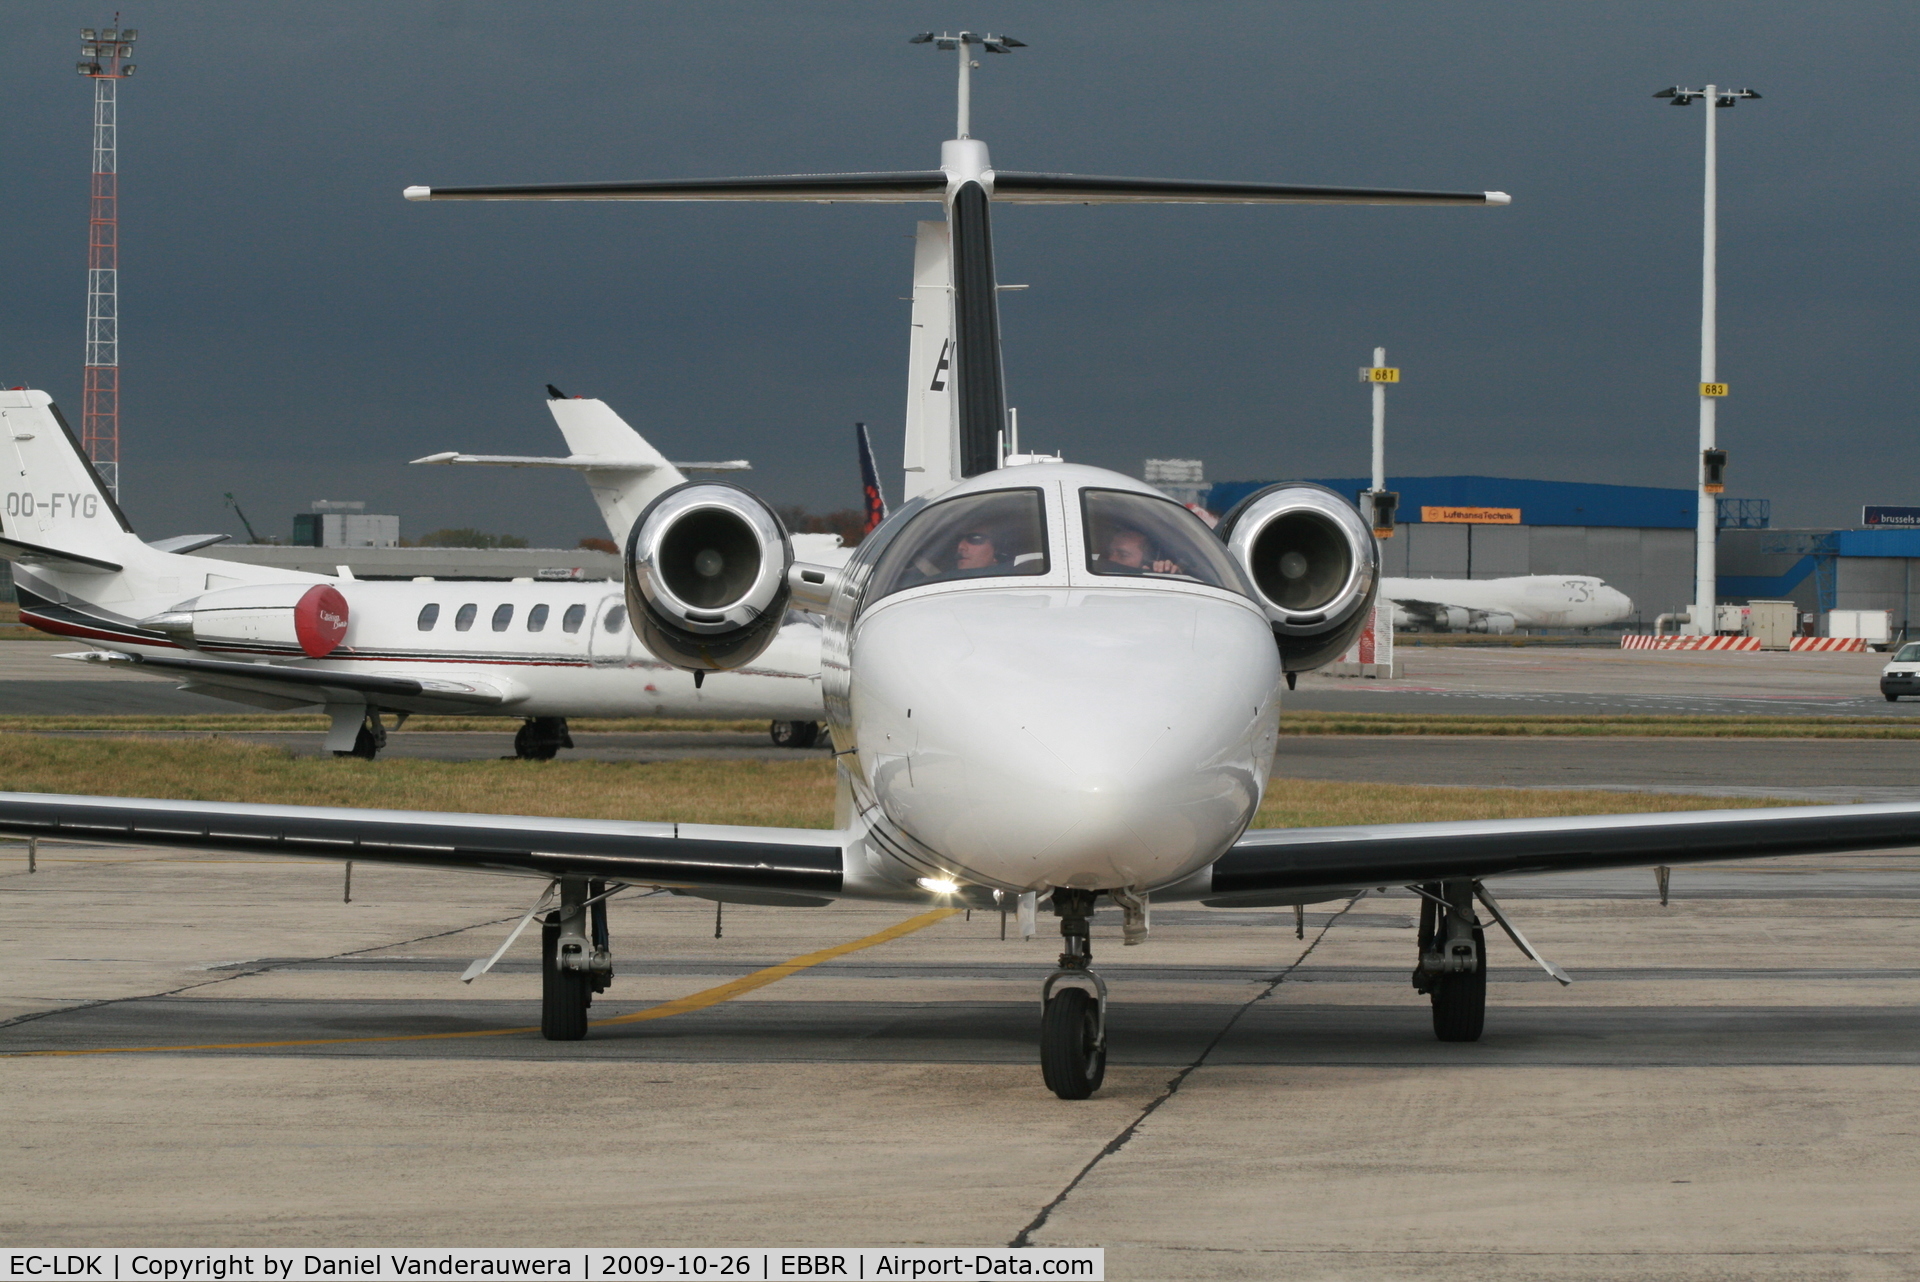 EC-LDK, 2009 Cessna 510 Citation Mustang Citation Mustang C/N 510-0152, Taxiing to park on General Aviation apron